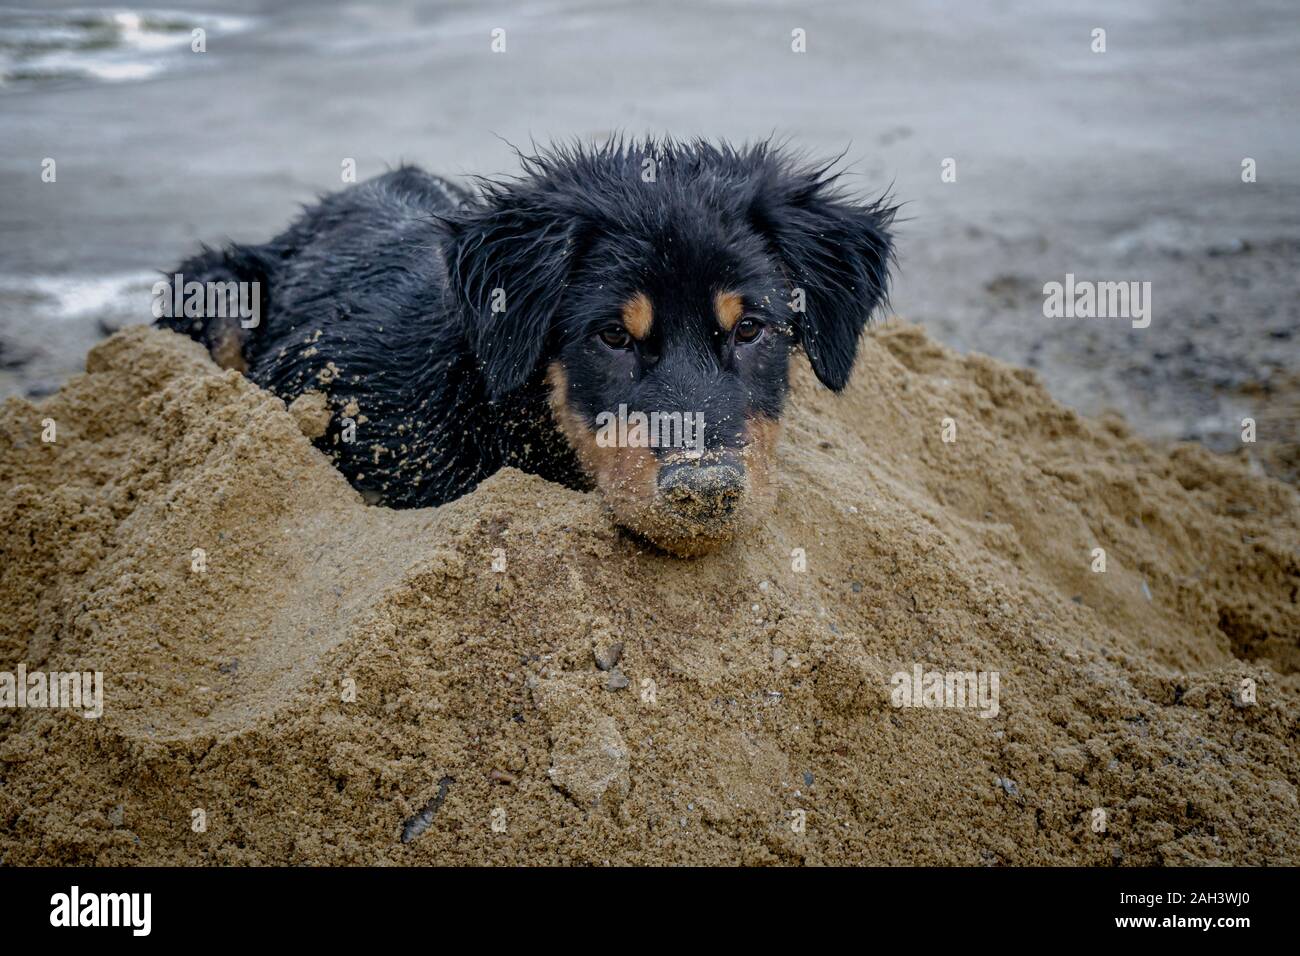 Dog Puppy black breed Golden Retriever sleeping on sand small dog cute for friendly Stock Photo